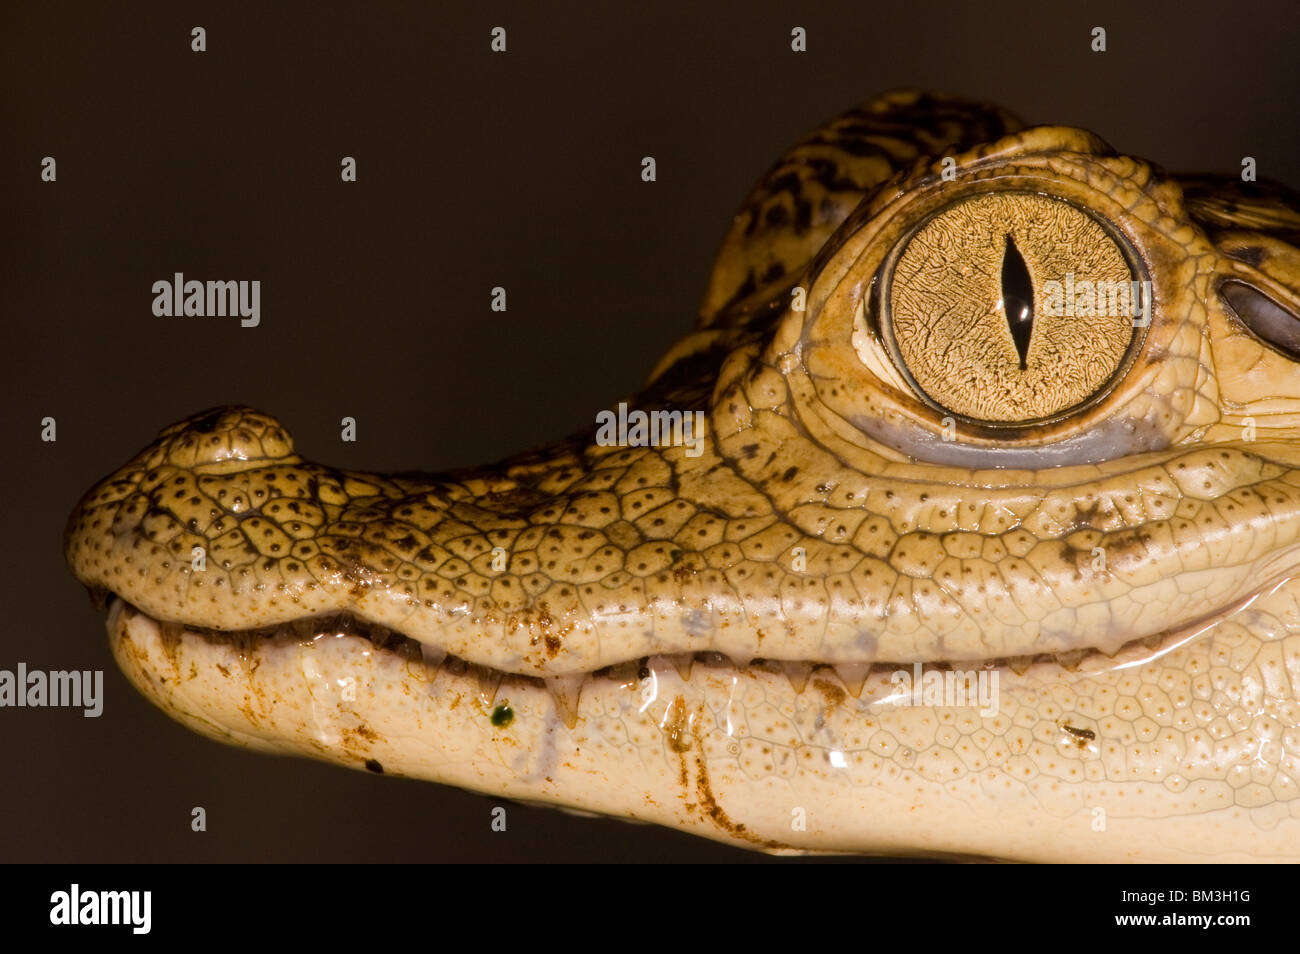 Close up photo of a the face of a Caiman in the Amazon, Peru Stock Photo